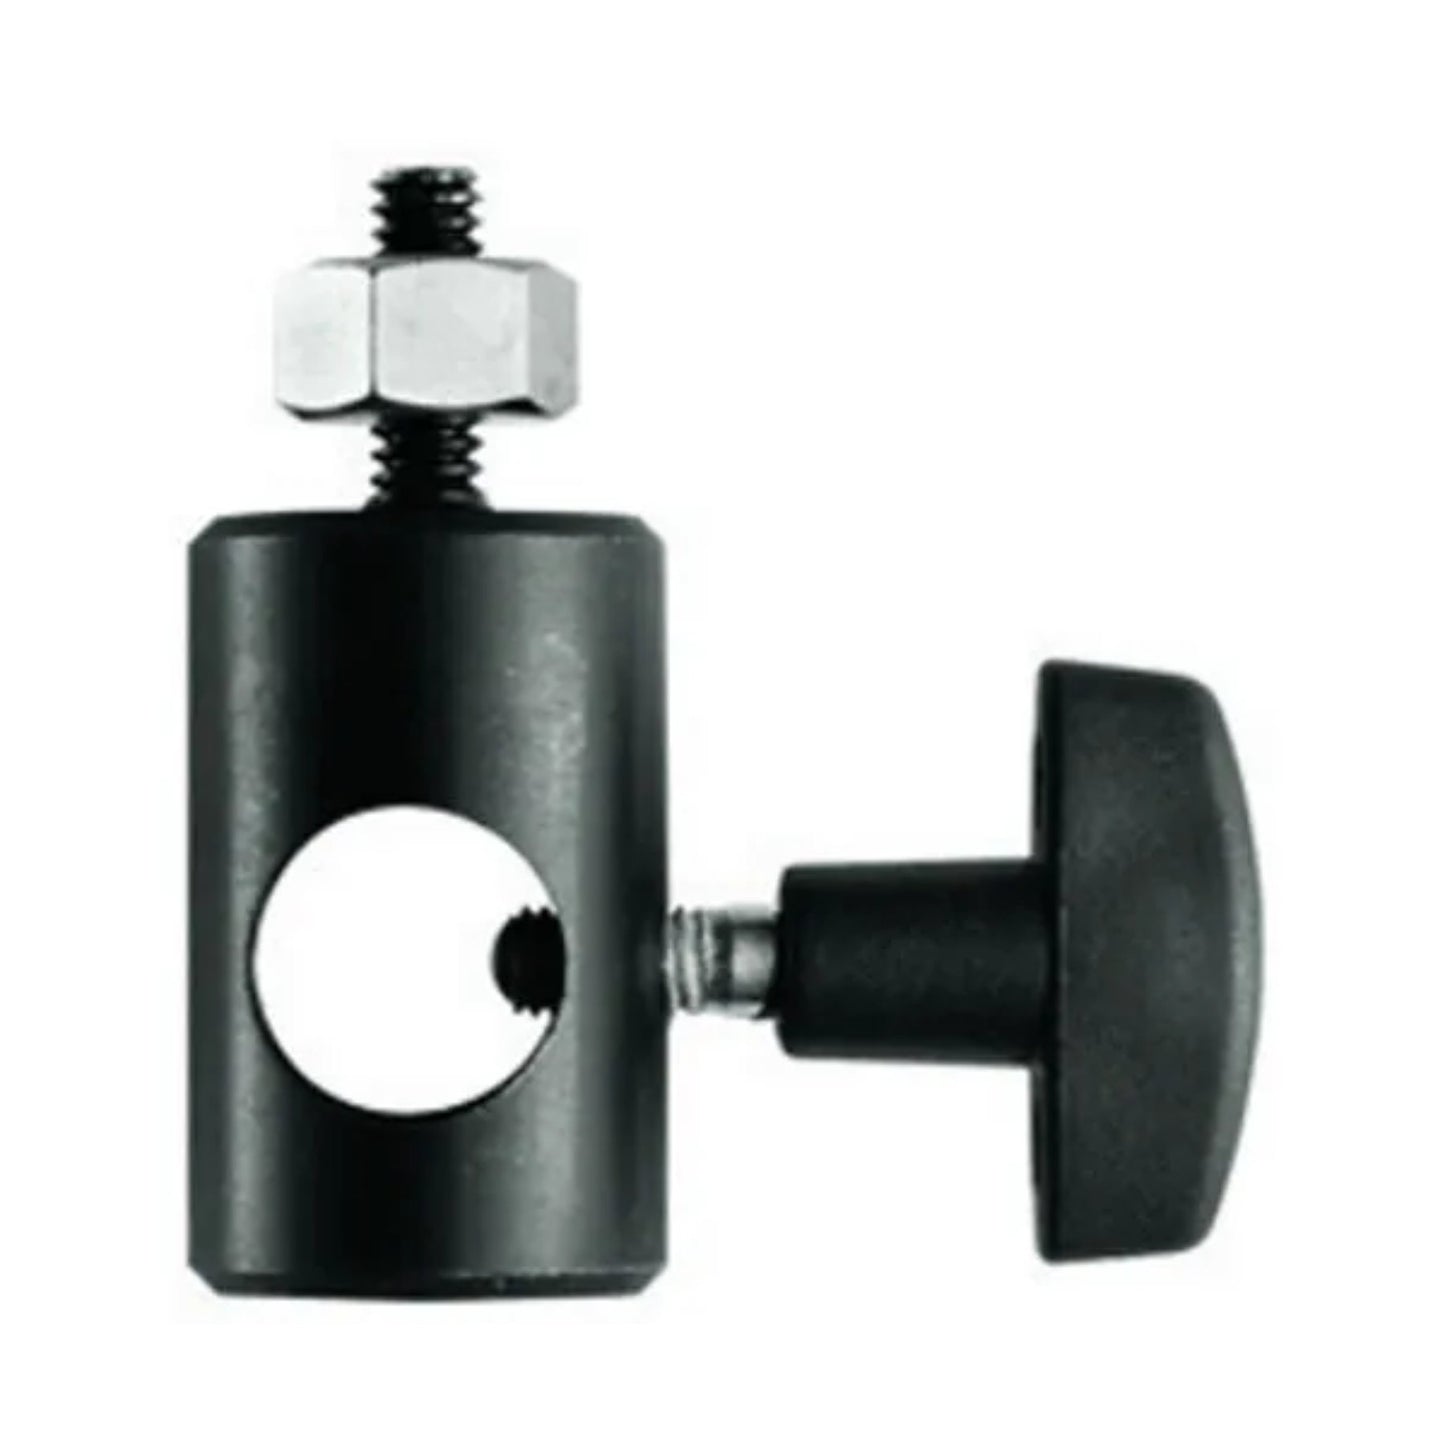 Manfrotto 014-14 adapter 5/8 to 1/4